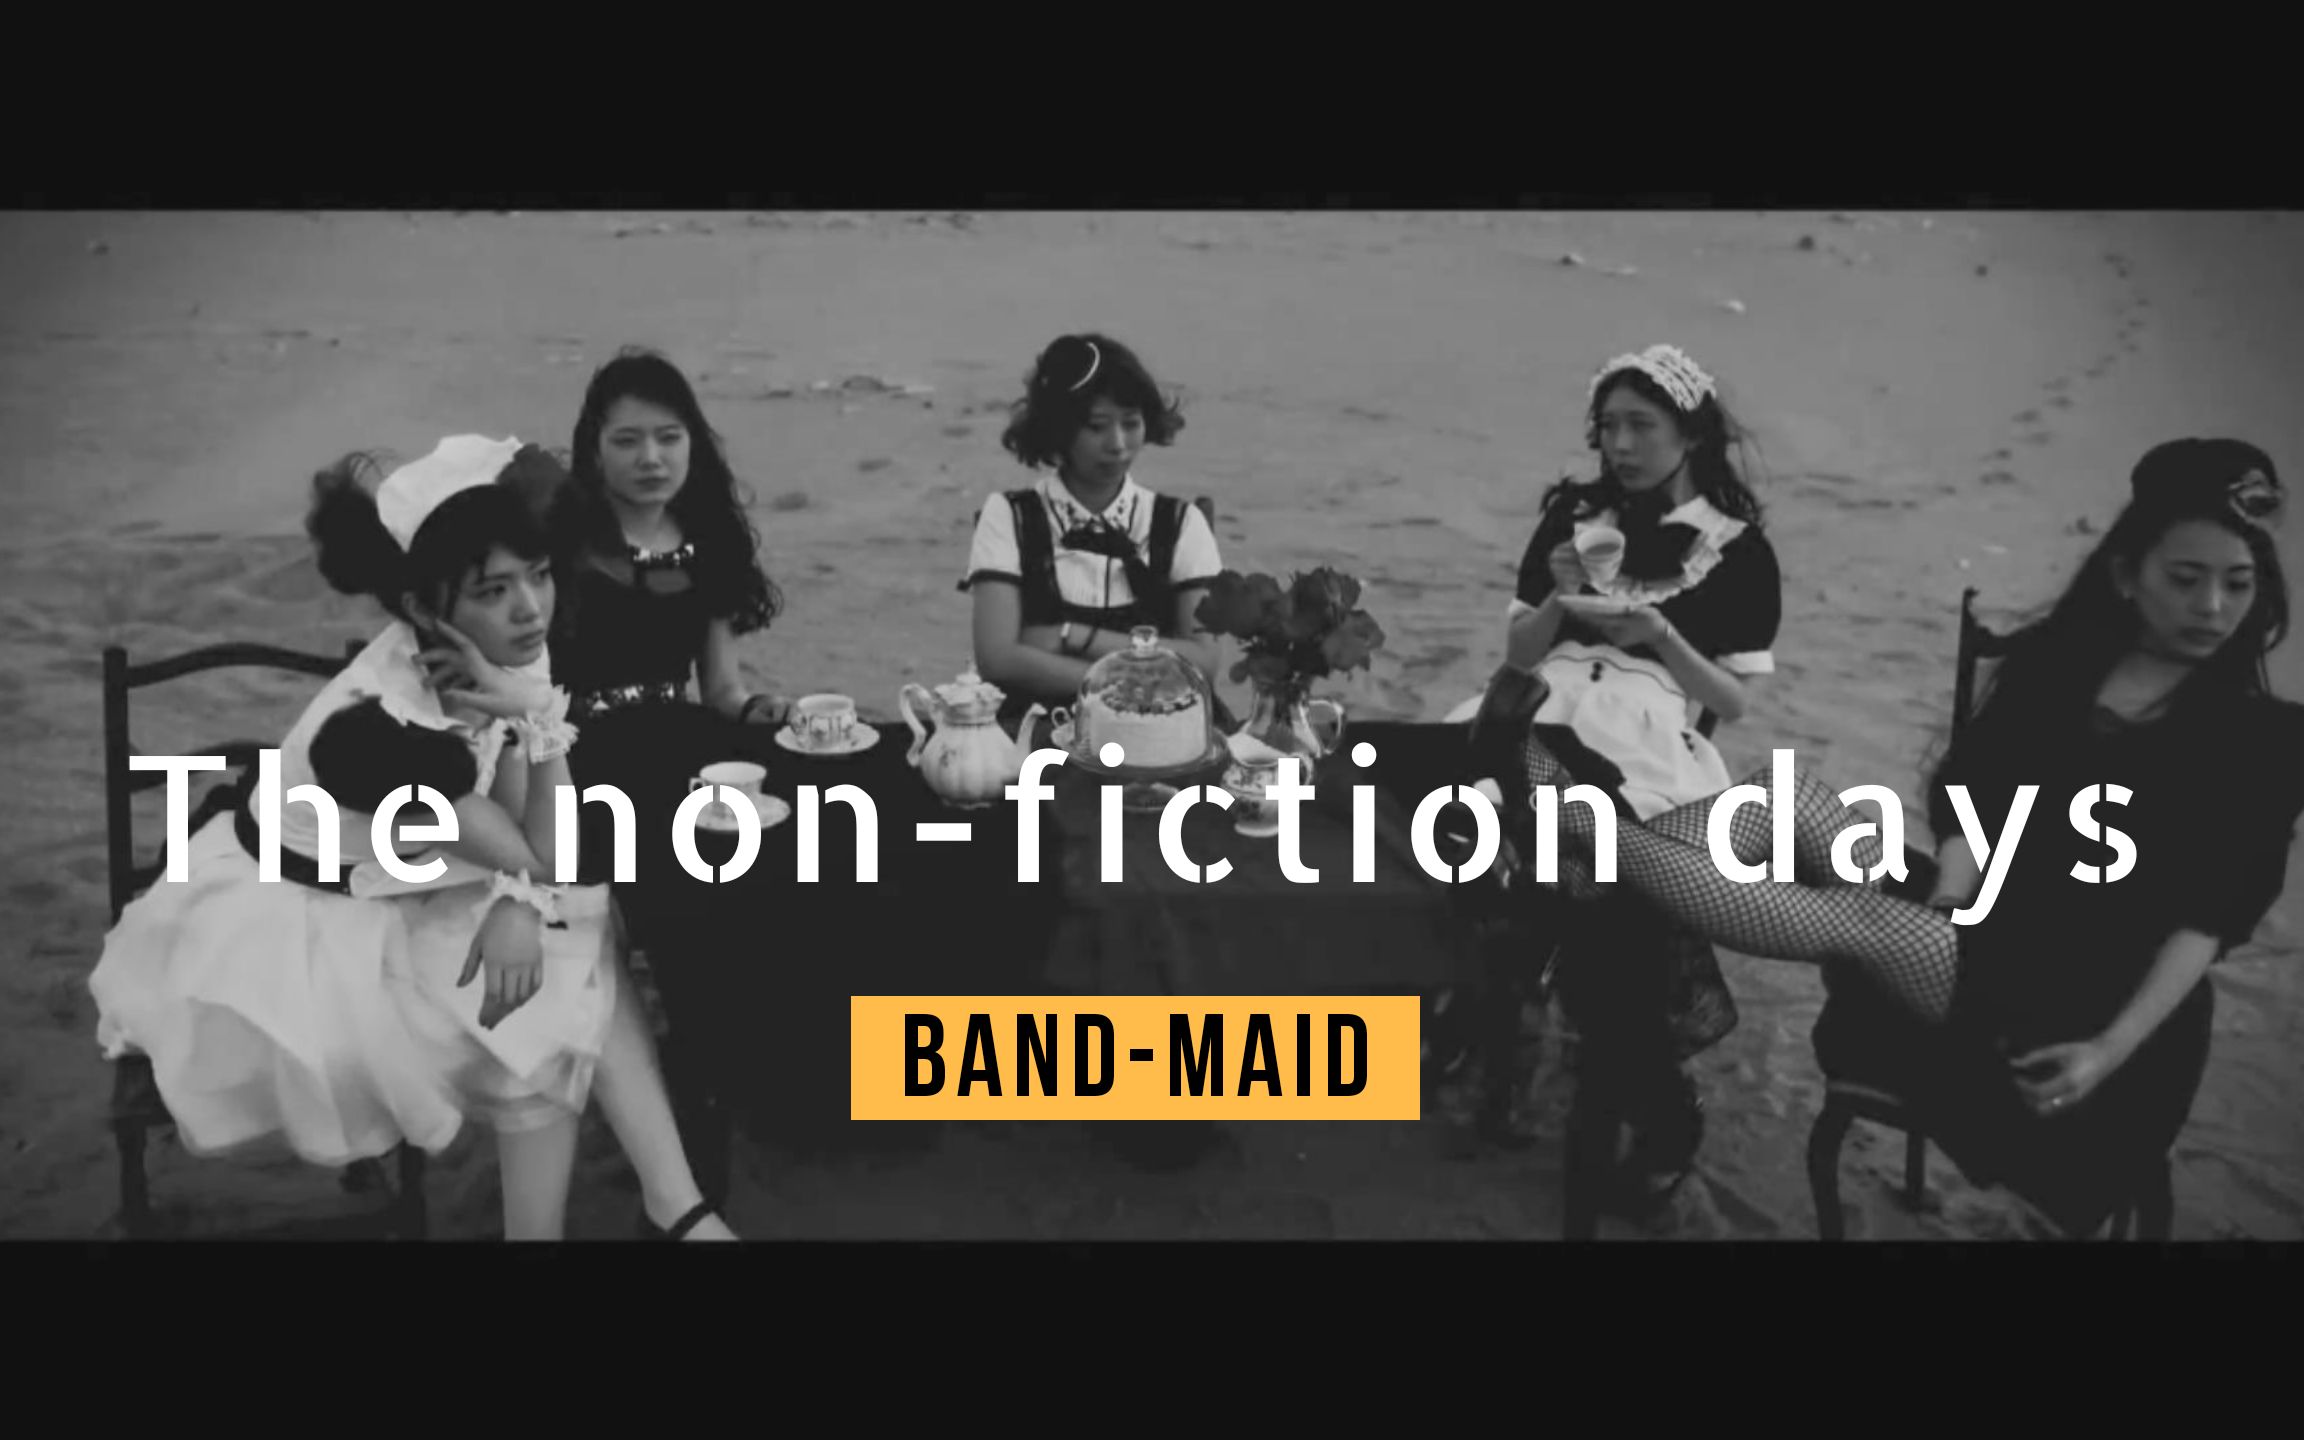 【BAND-MAID】the non-fiction days 中日字幕